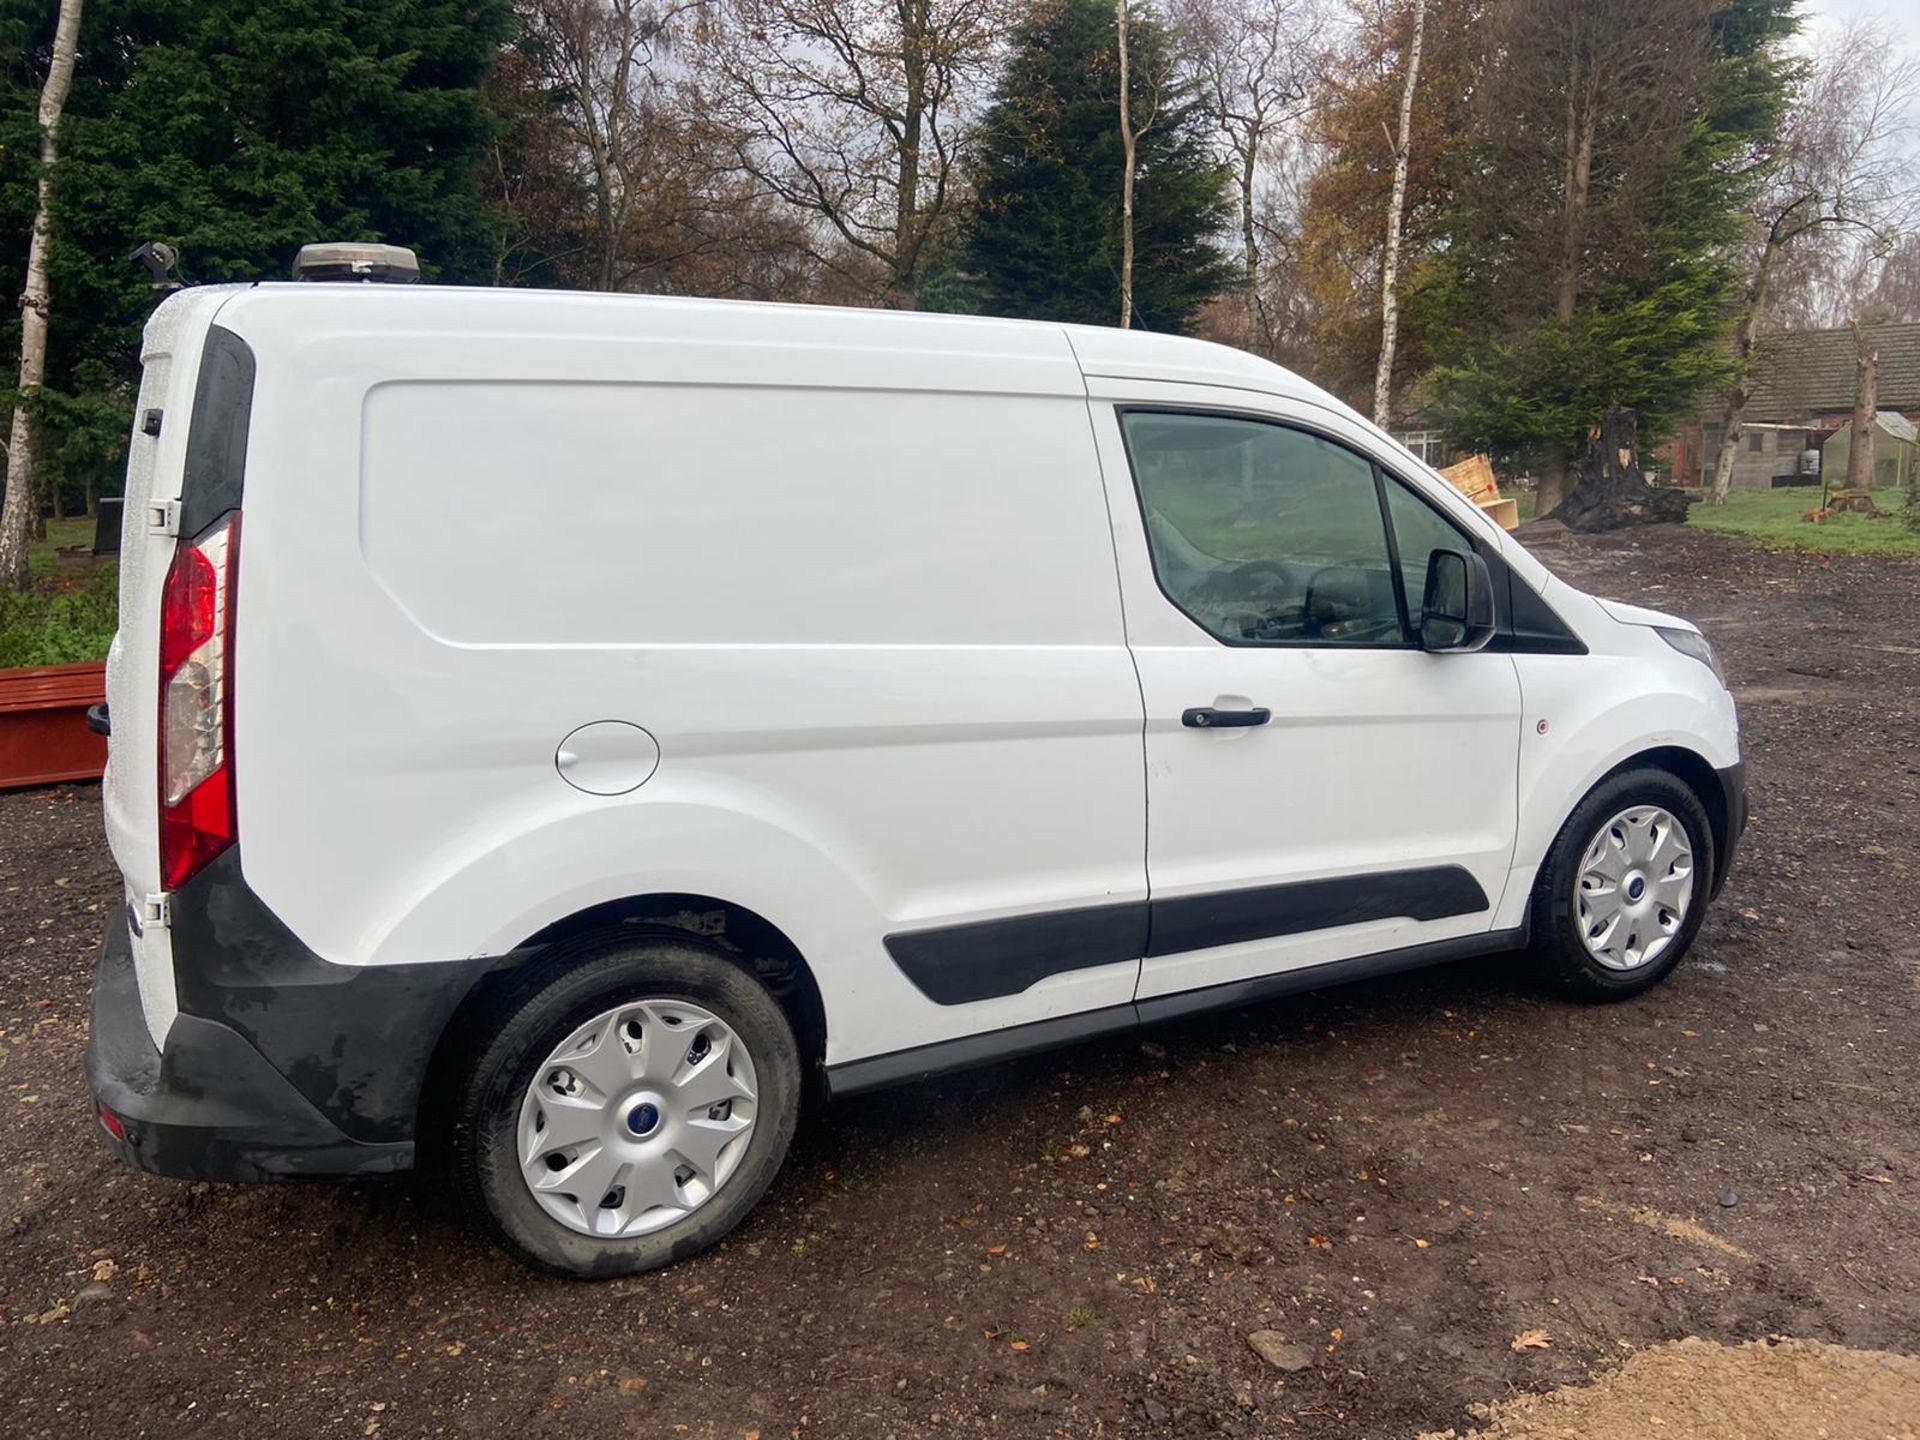 2015/64 REG FORD TRANSIT CONNECT 200 ECONETIC 1.6 DIESEL WHITE PANEL VAN, SHOWING 0 FORMER KEEPERS - Image 6 of 10